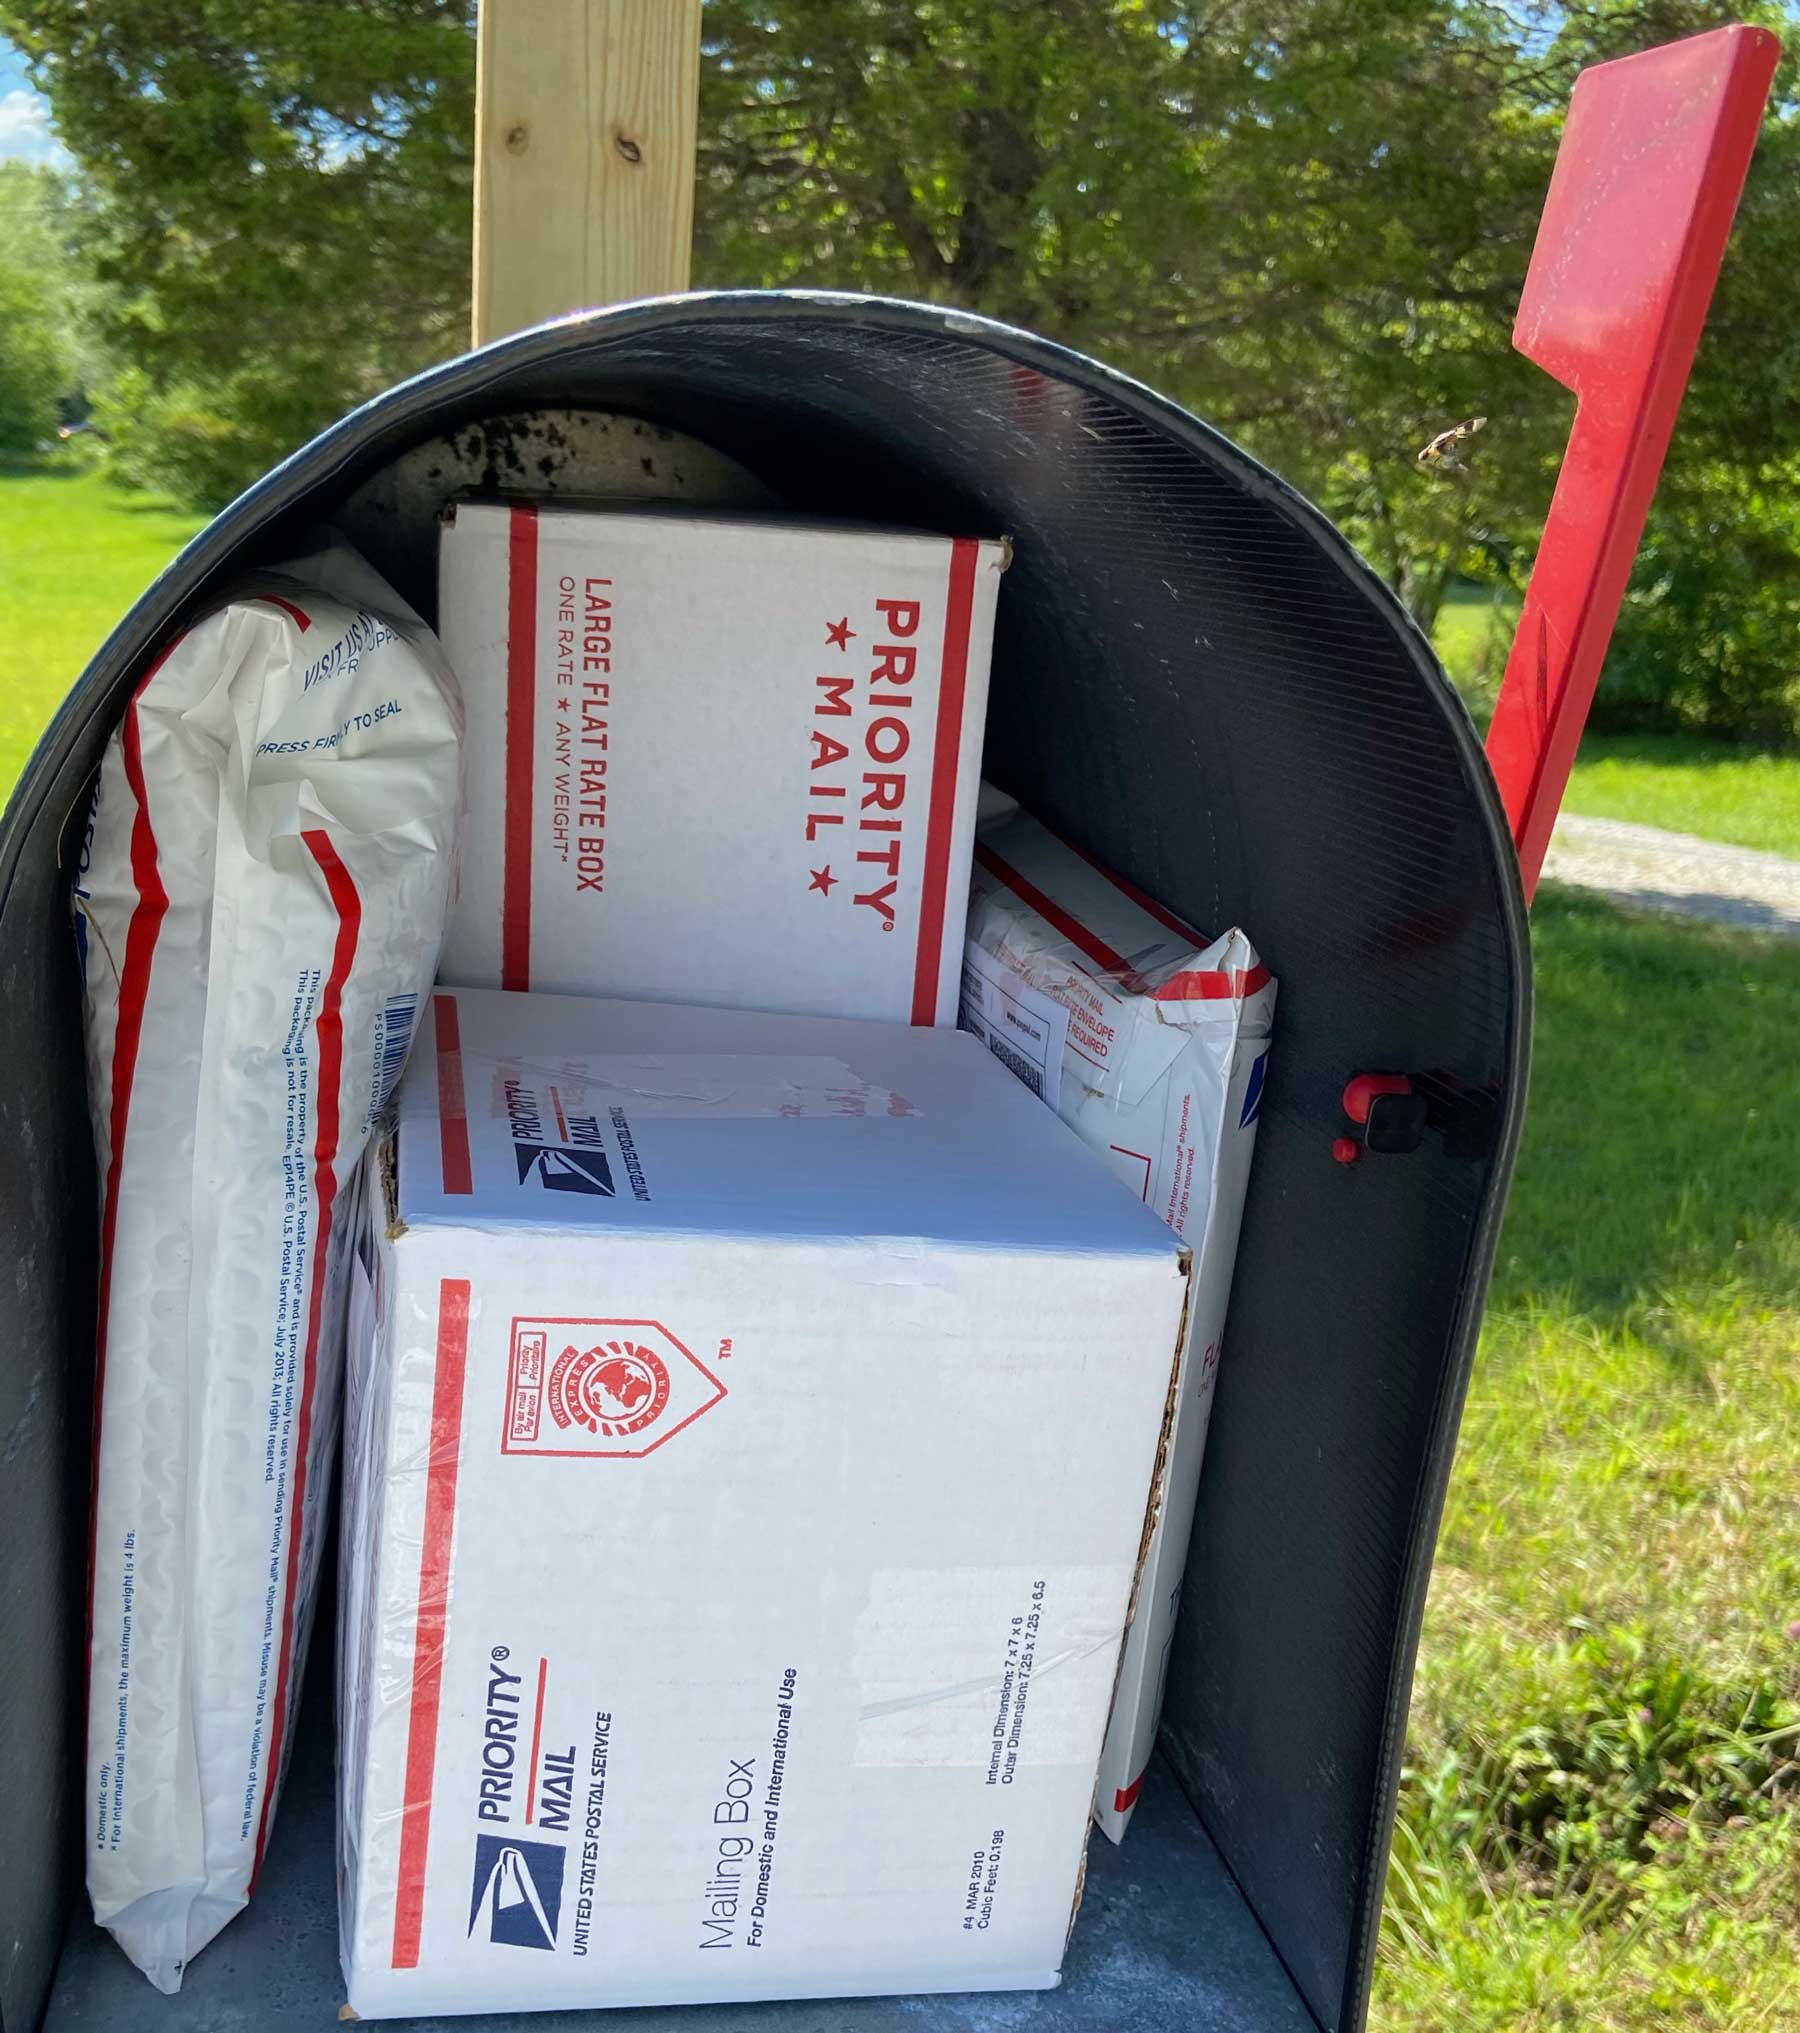 Five backorders are going out!